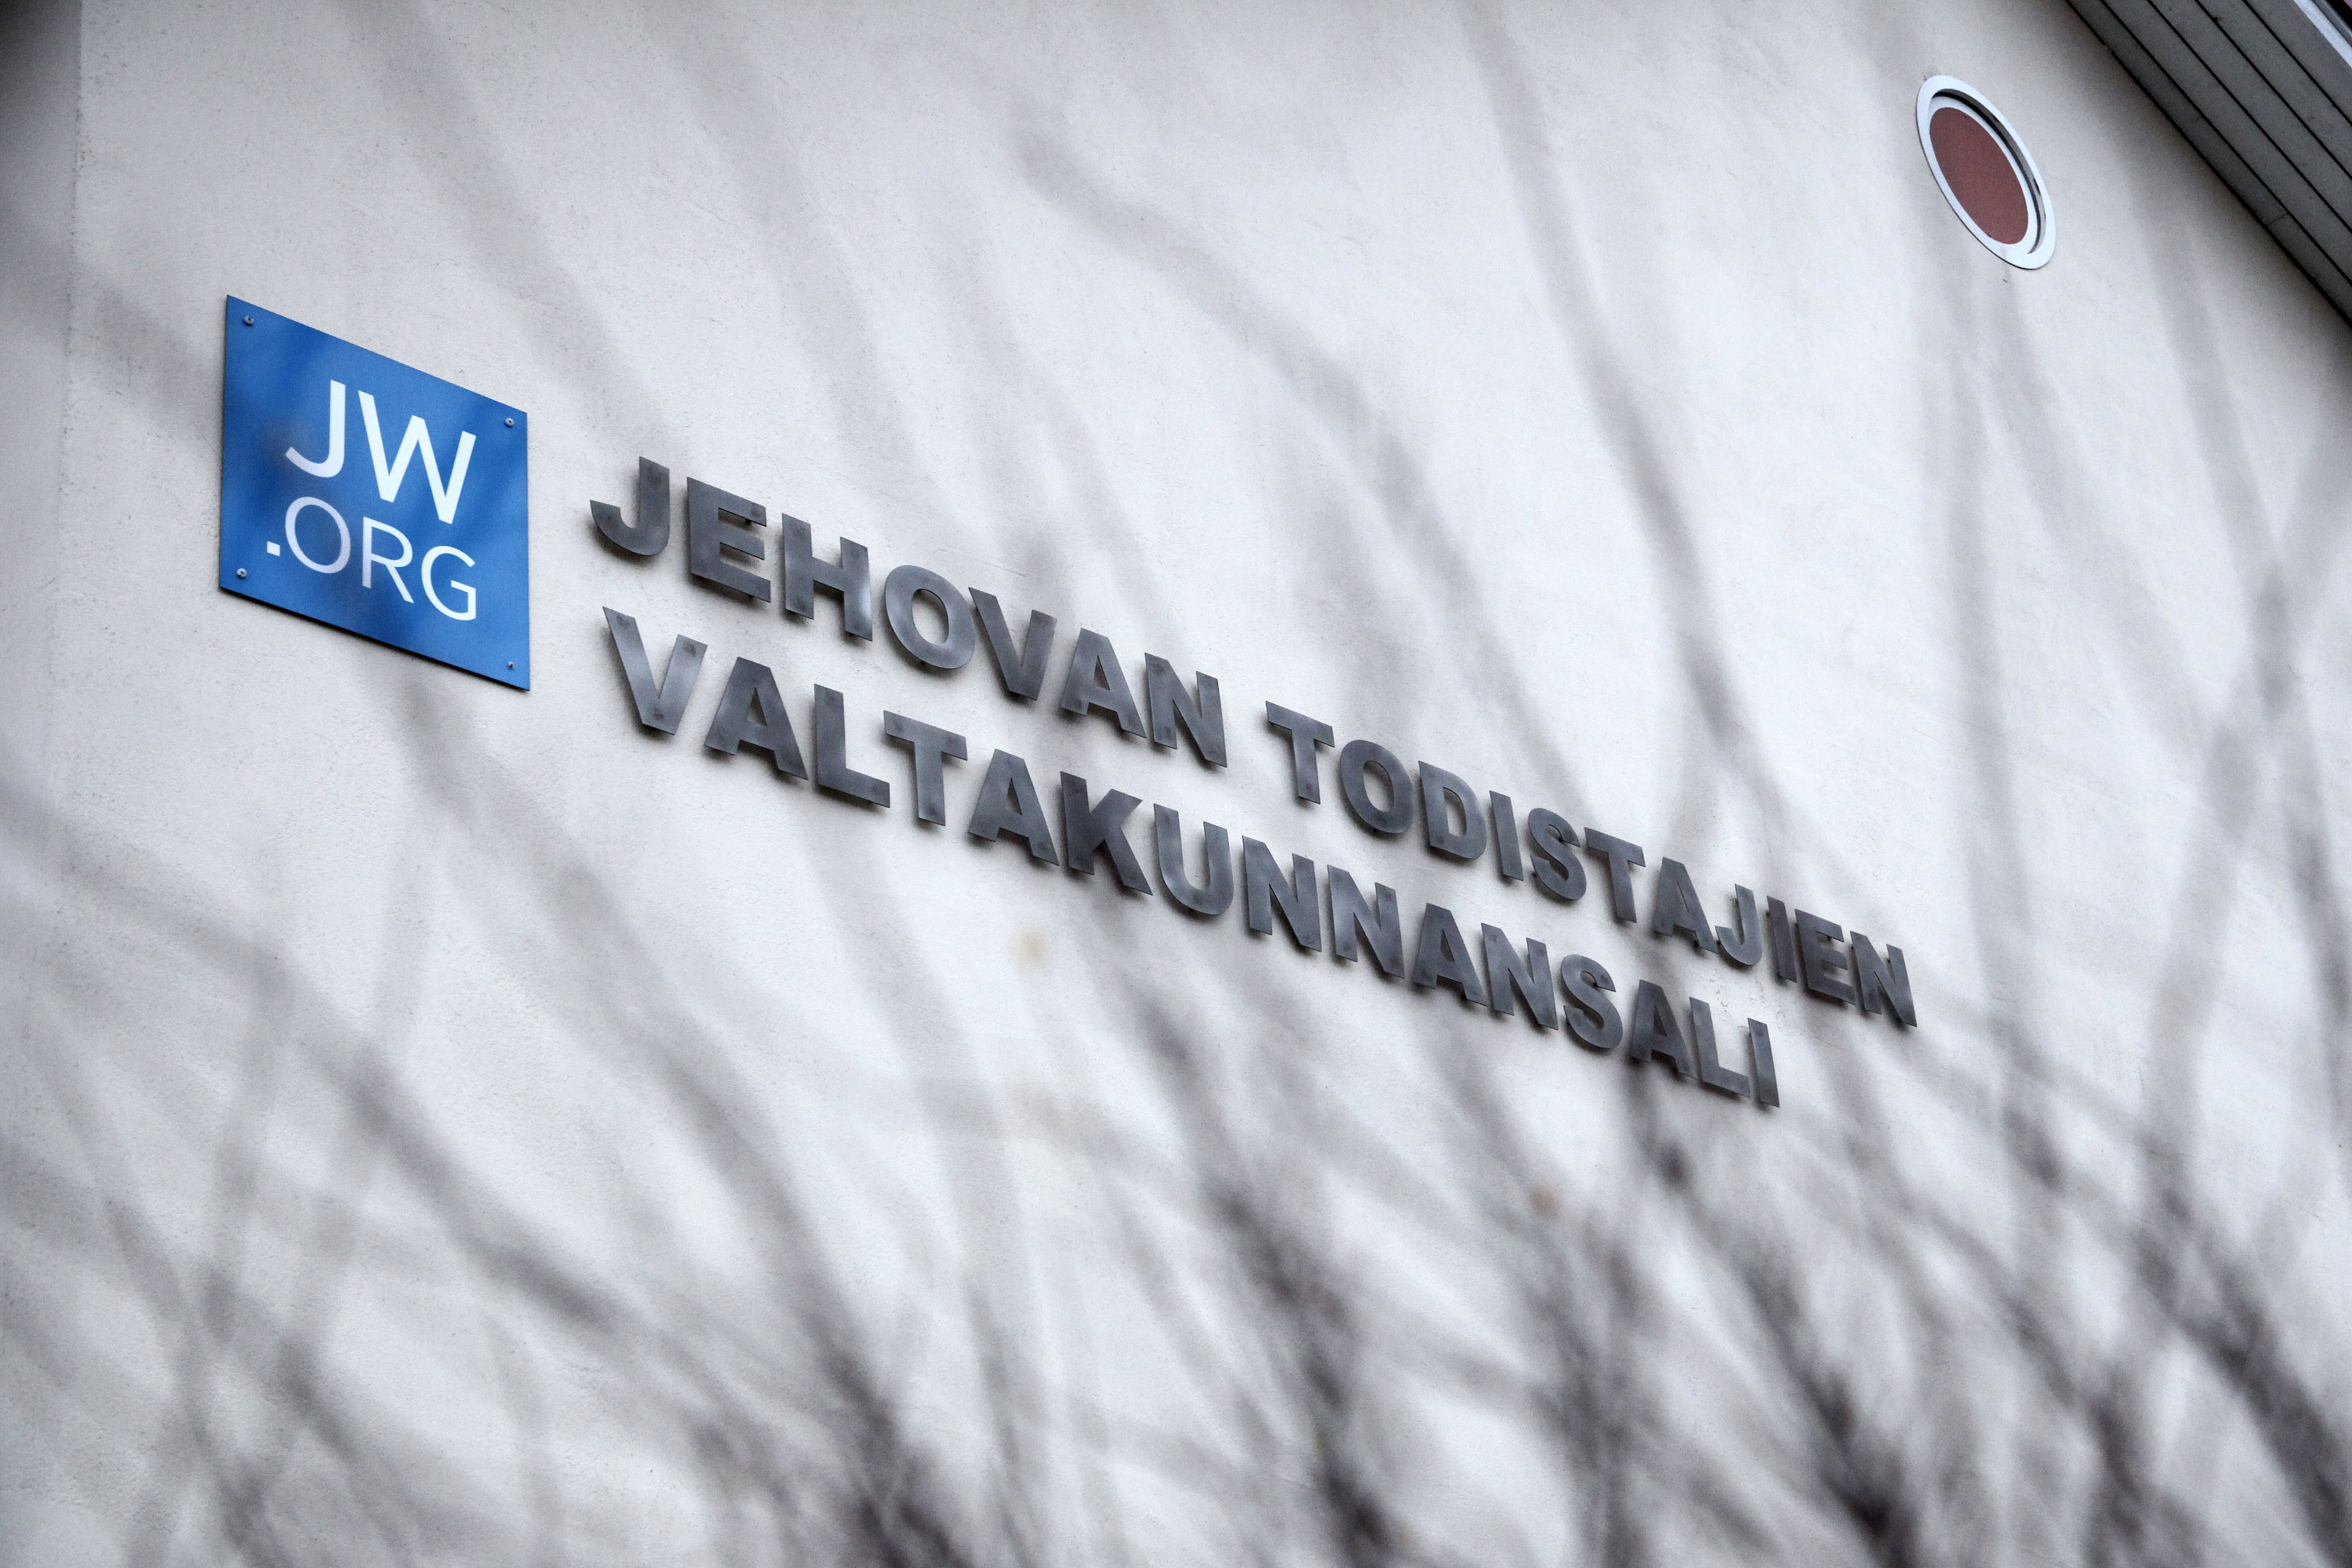 Finland did not violate the religious freedom of Jehovah’s Witnesses, the rules of European courts